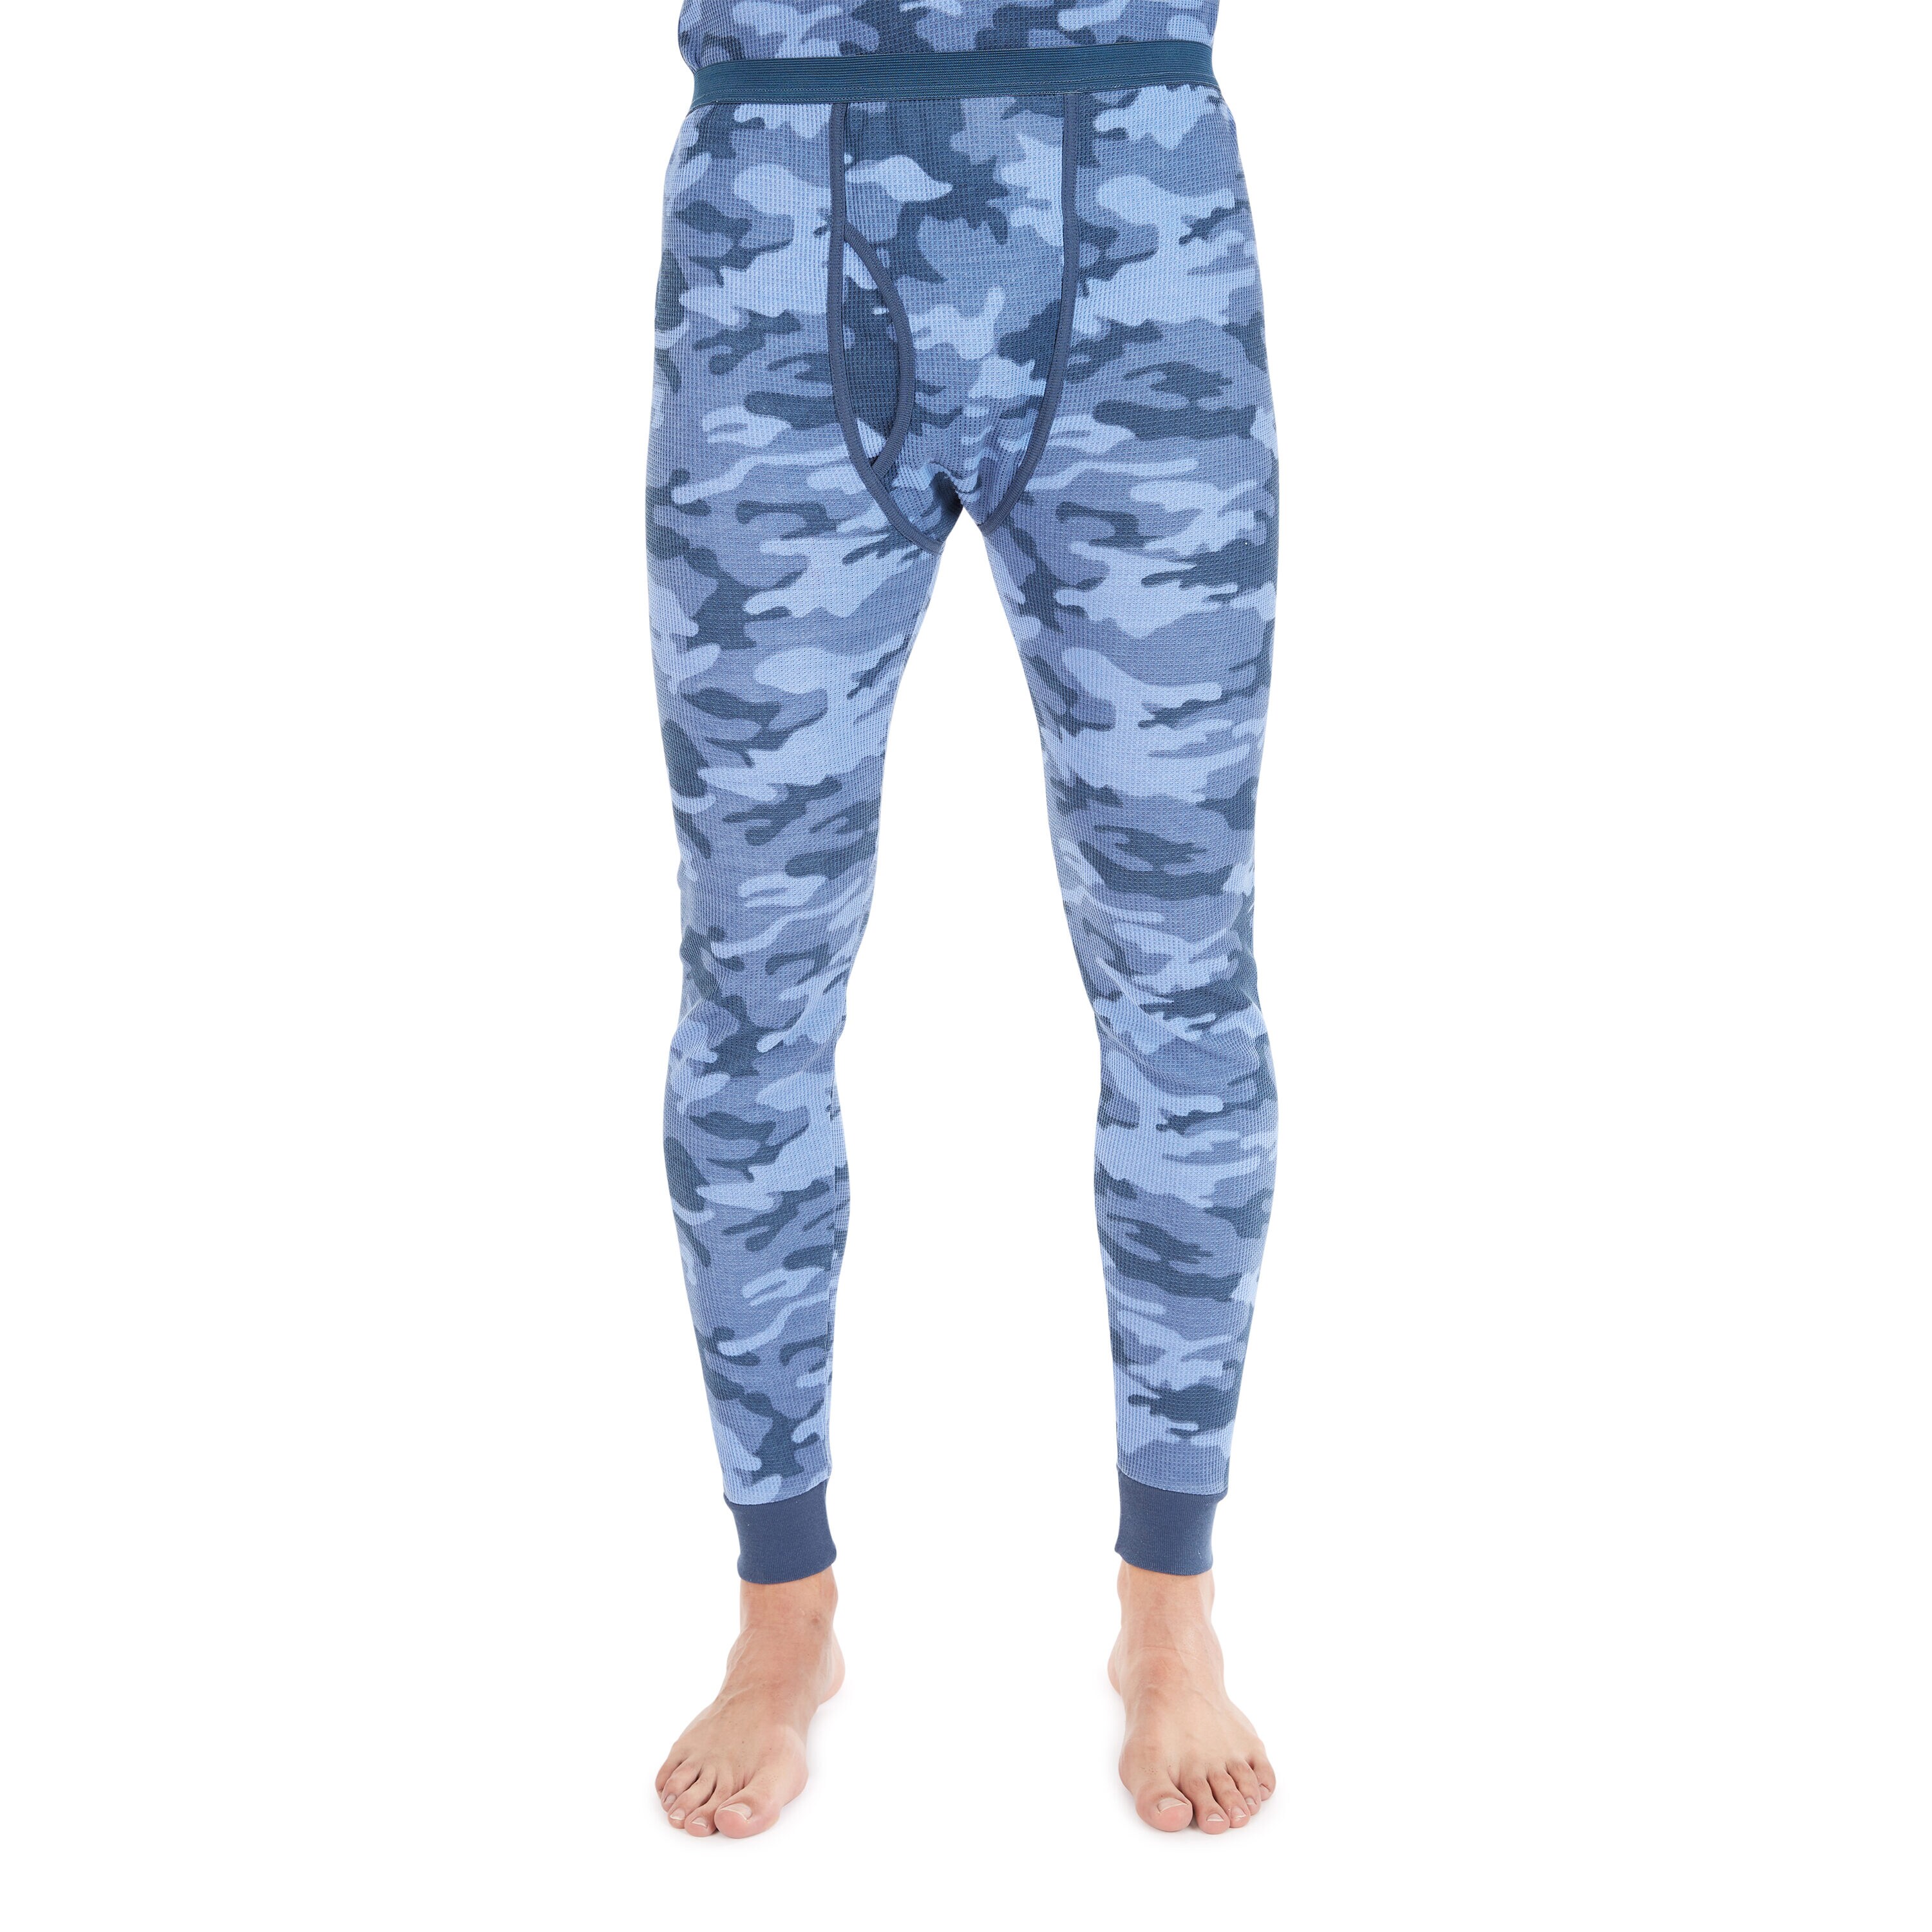  Thermajane Camo Long Johns Thermal Underwear For